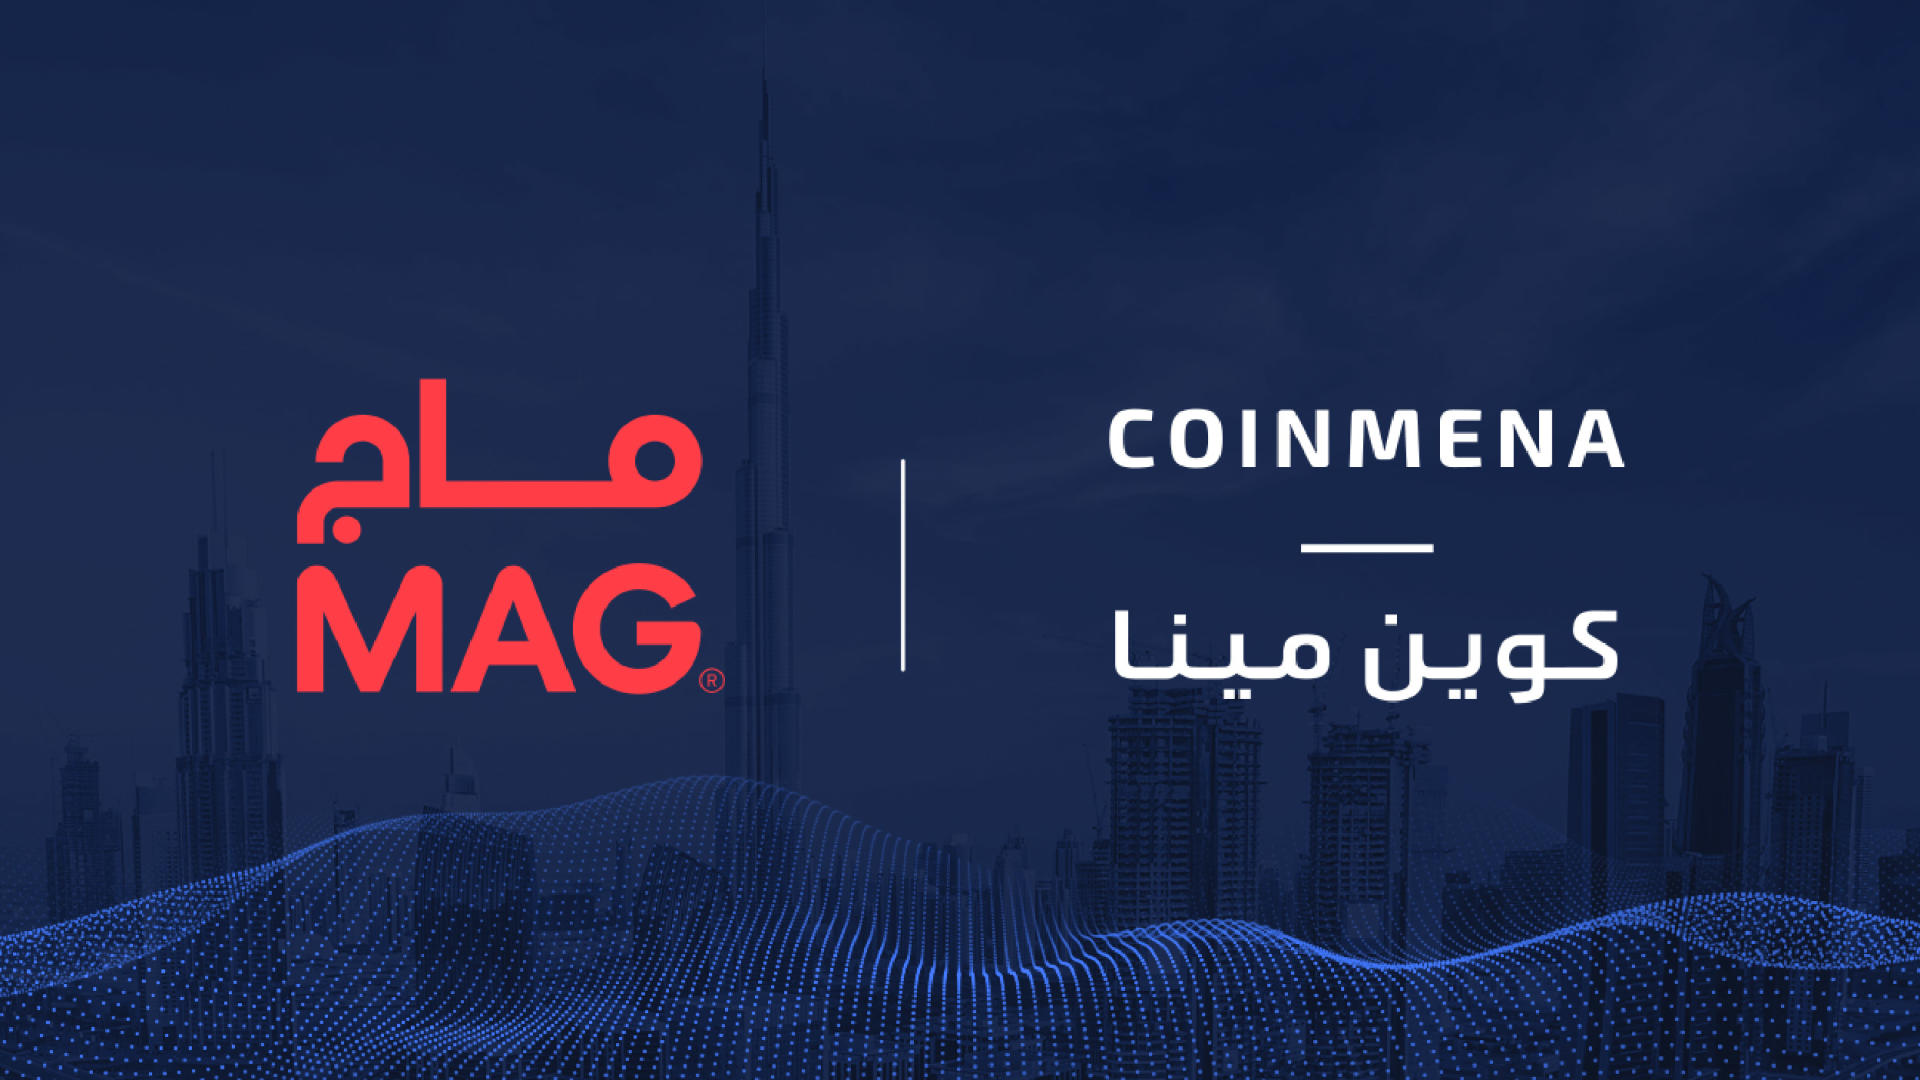 MAG PARTNERS WITH COINMENA TO FACILITATE PROPERTY TRANSACTIONS USING CRYPTOCURRENCY